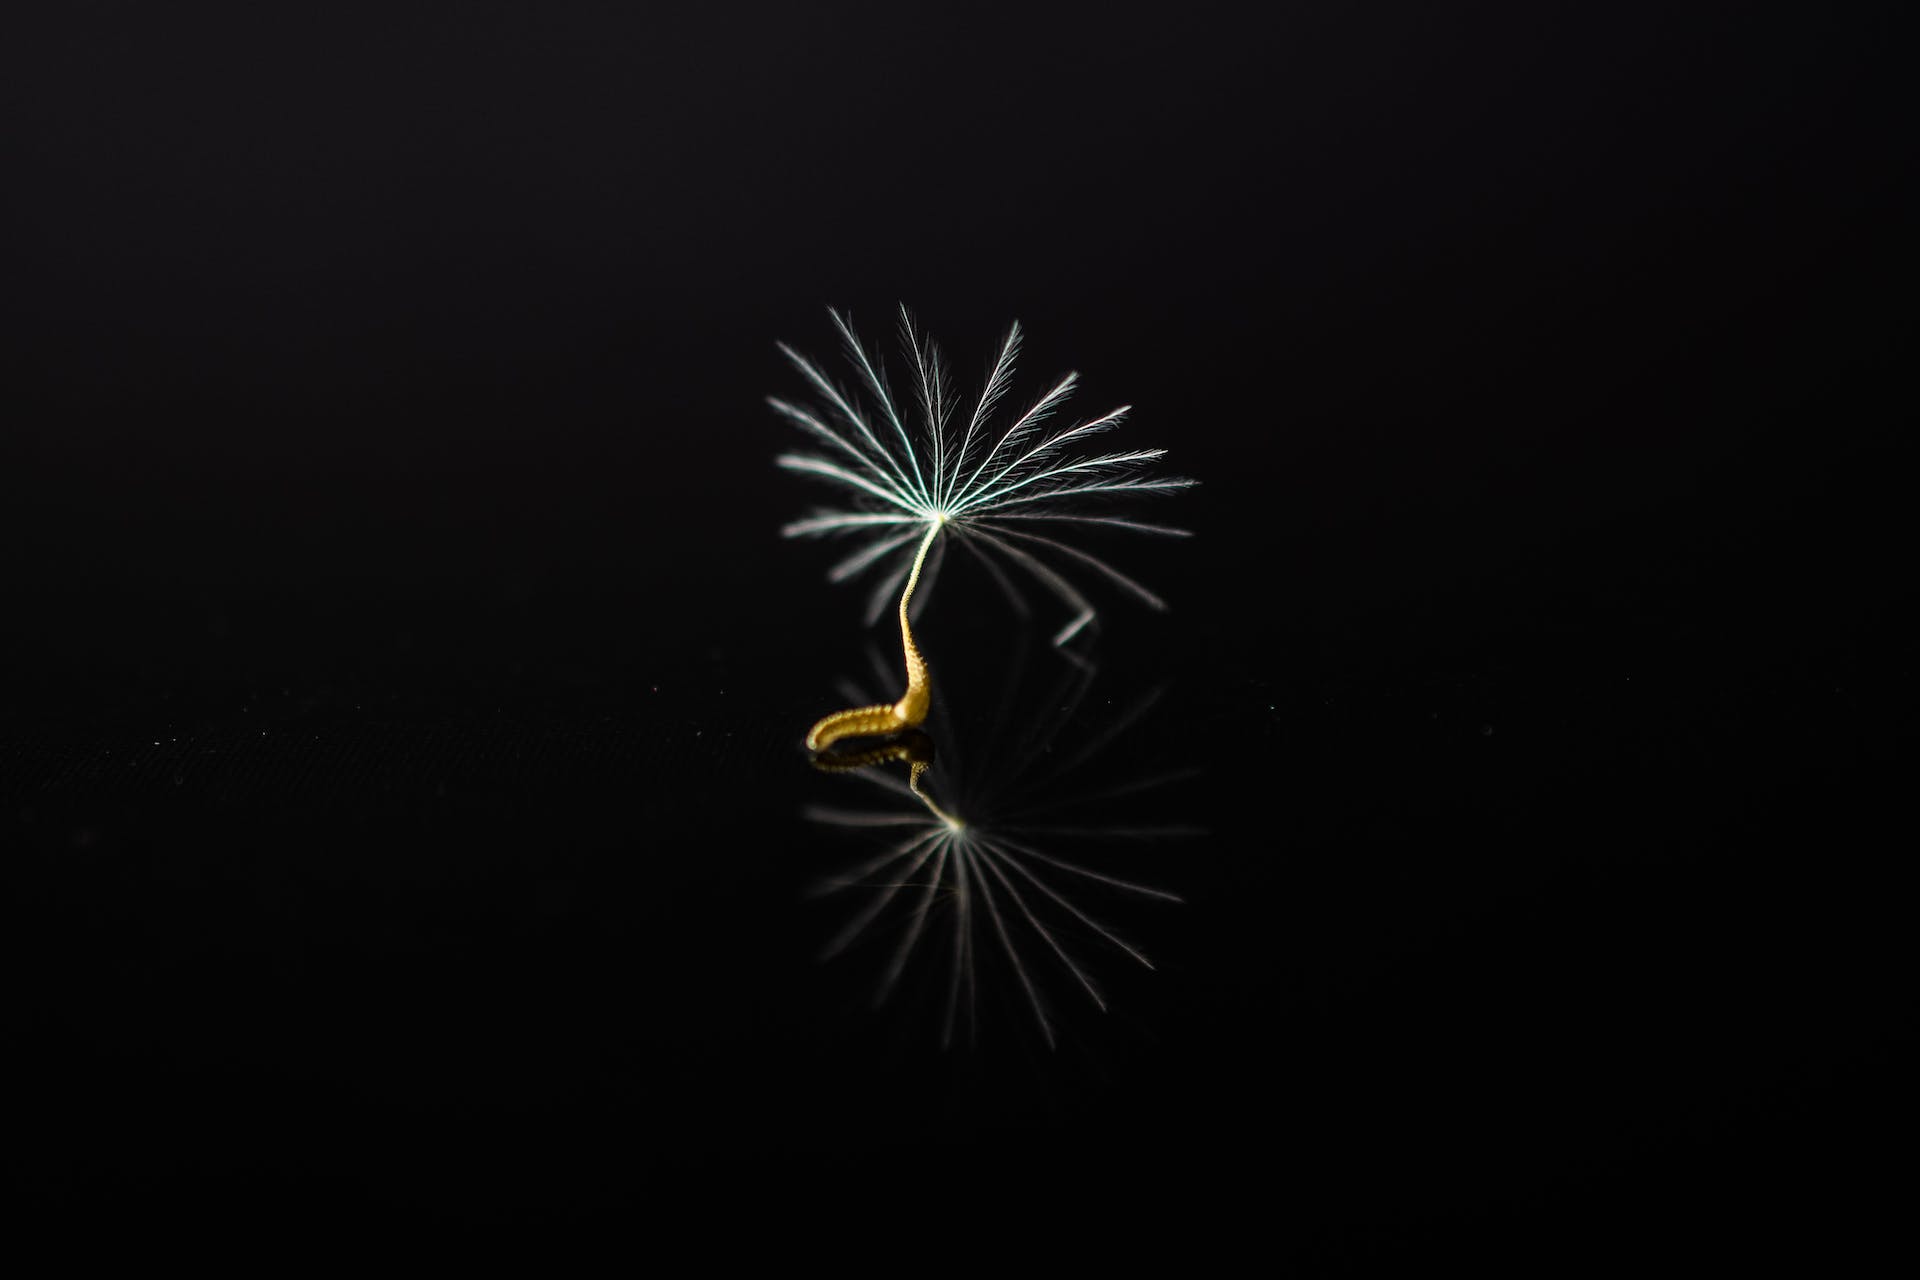 Single dandelion seed floating gracefully, embodying the essence of entrepreneurial motivation and potential against a stark black background.